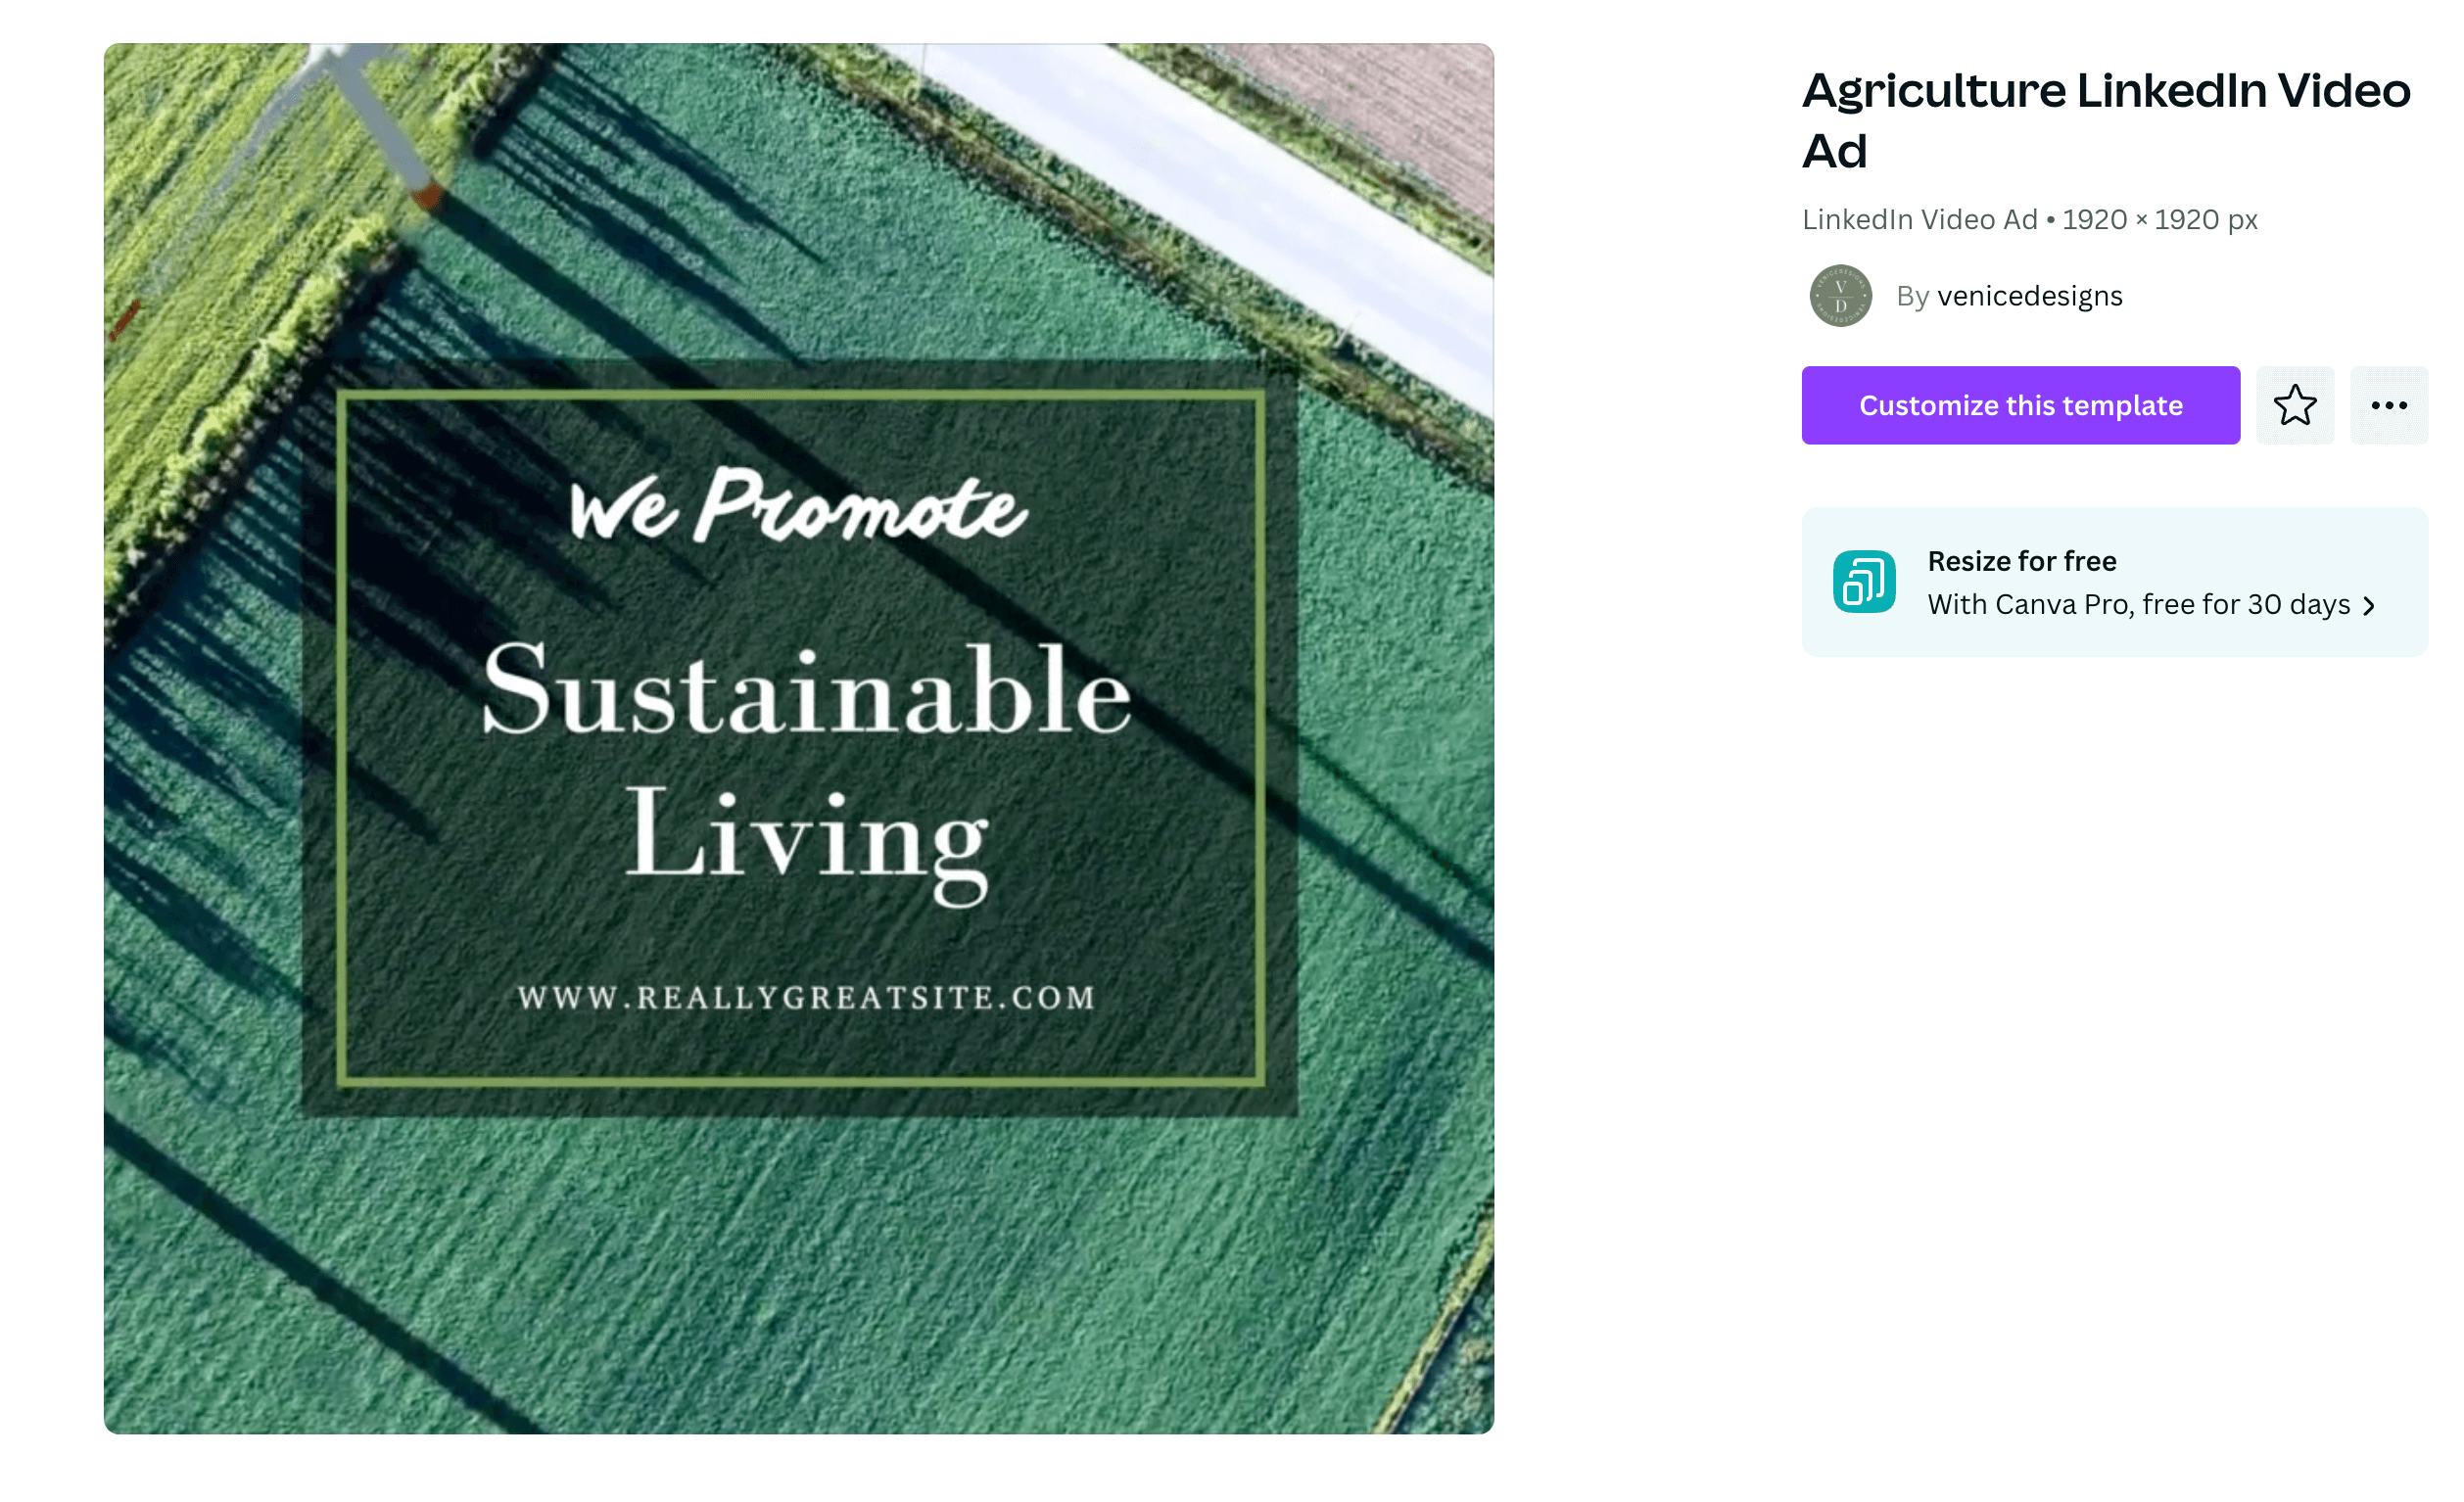 Text that reads "We promote sustainable living" over an aerial shot of a field